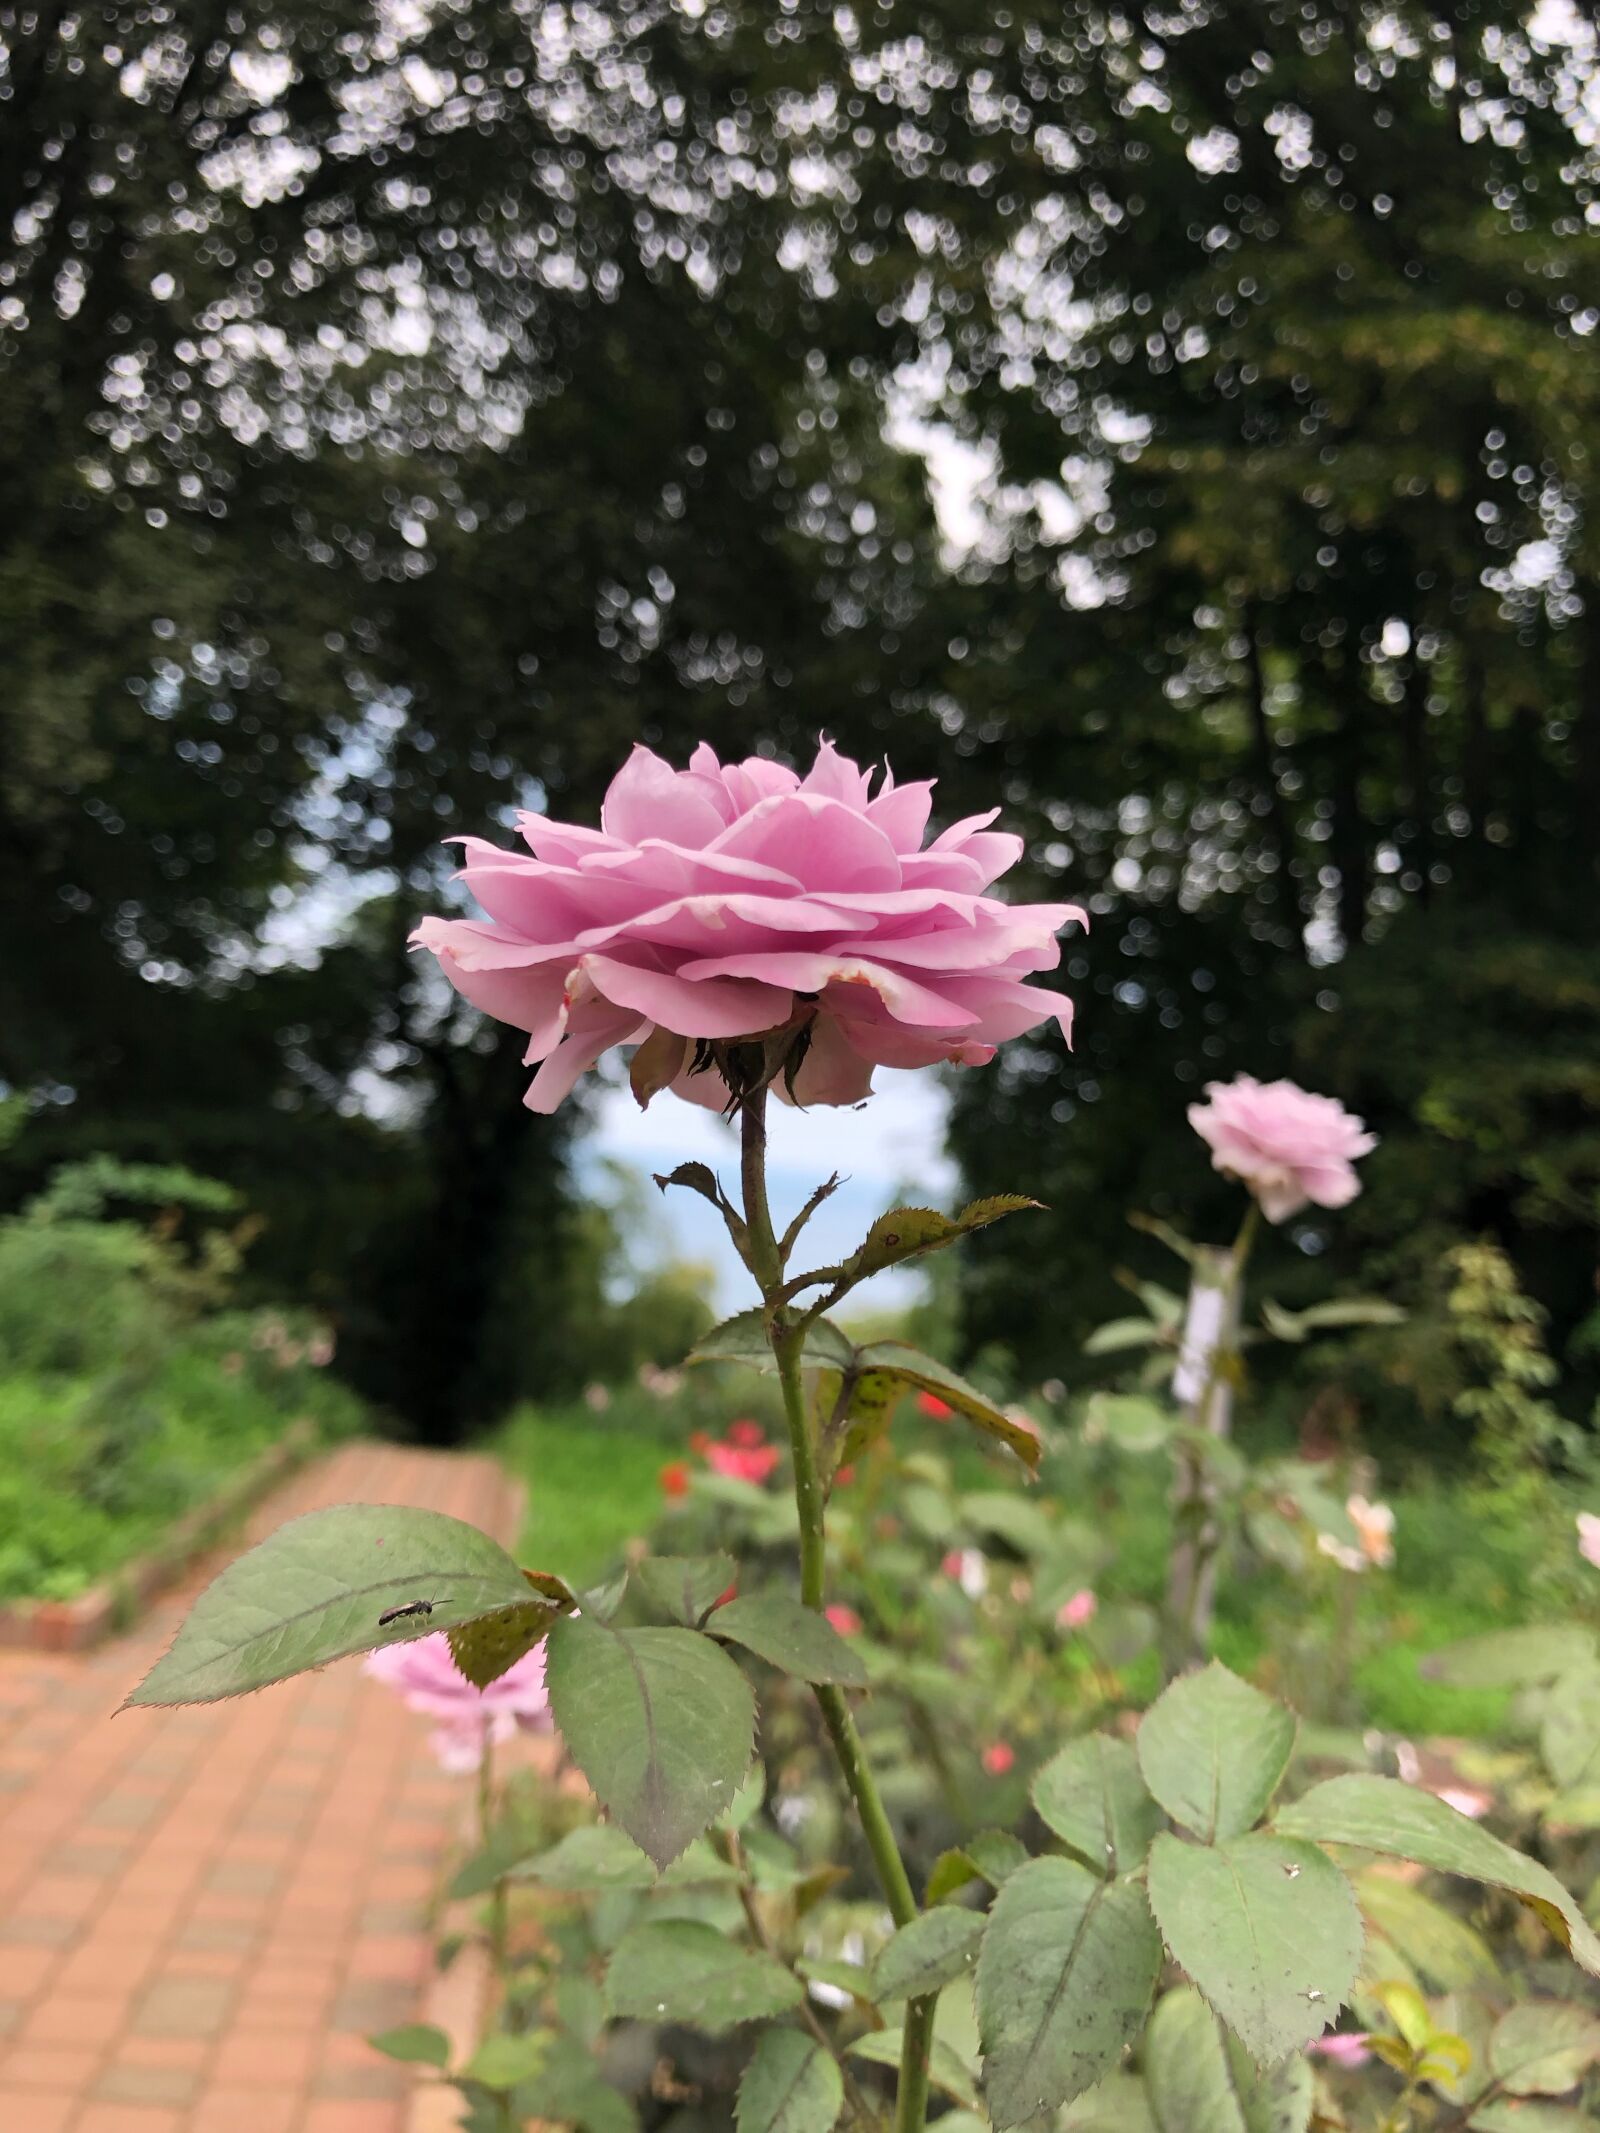 Apple iPhone X + iPhone X back dual camera 4mm f/1.8 sample photo. Rose, word, red photography